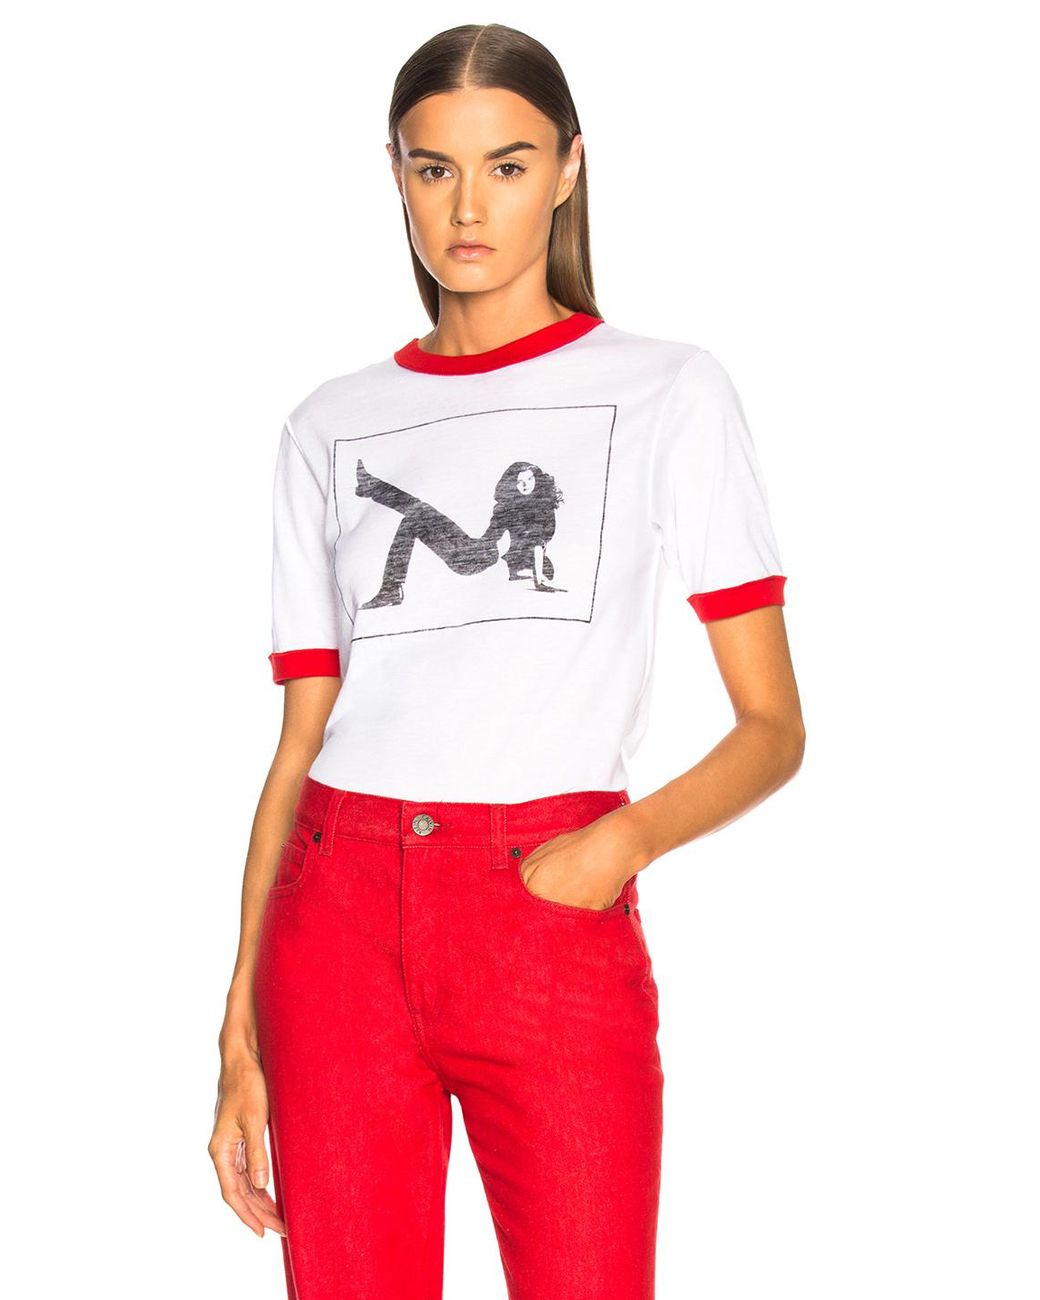 CALVIN KLEIN 205W39NYC Brooke Shields Graphic Tee in Red | Lyst